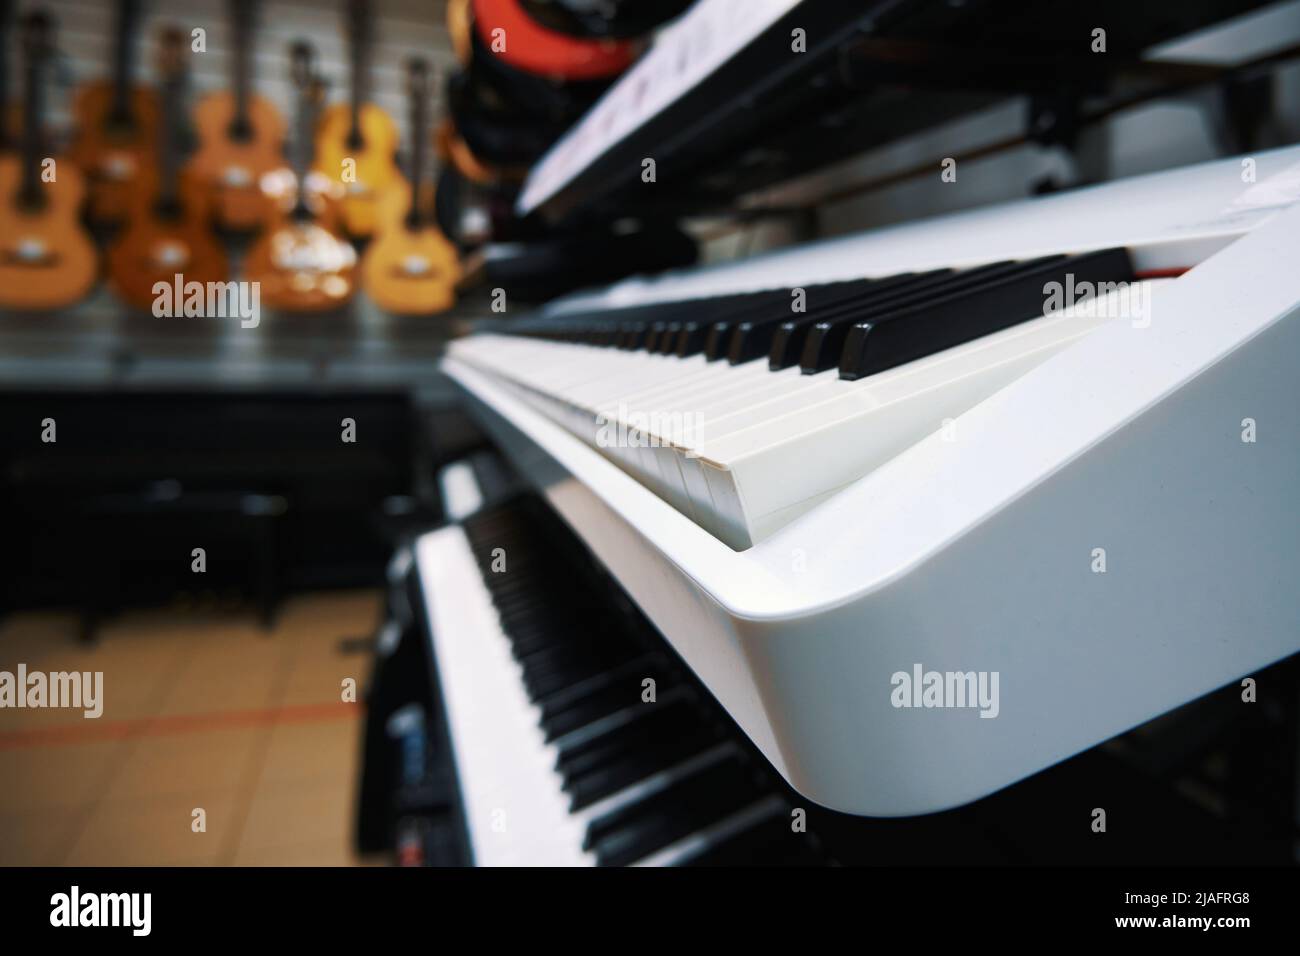 Modern electronic keyboard synthesizers in a music store. Digital pianos in store Stock Photo